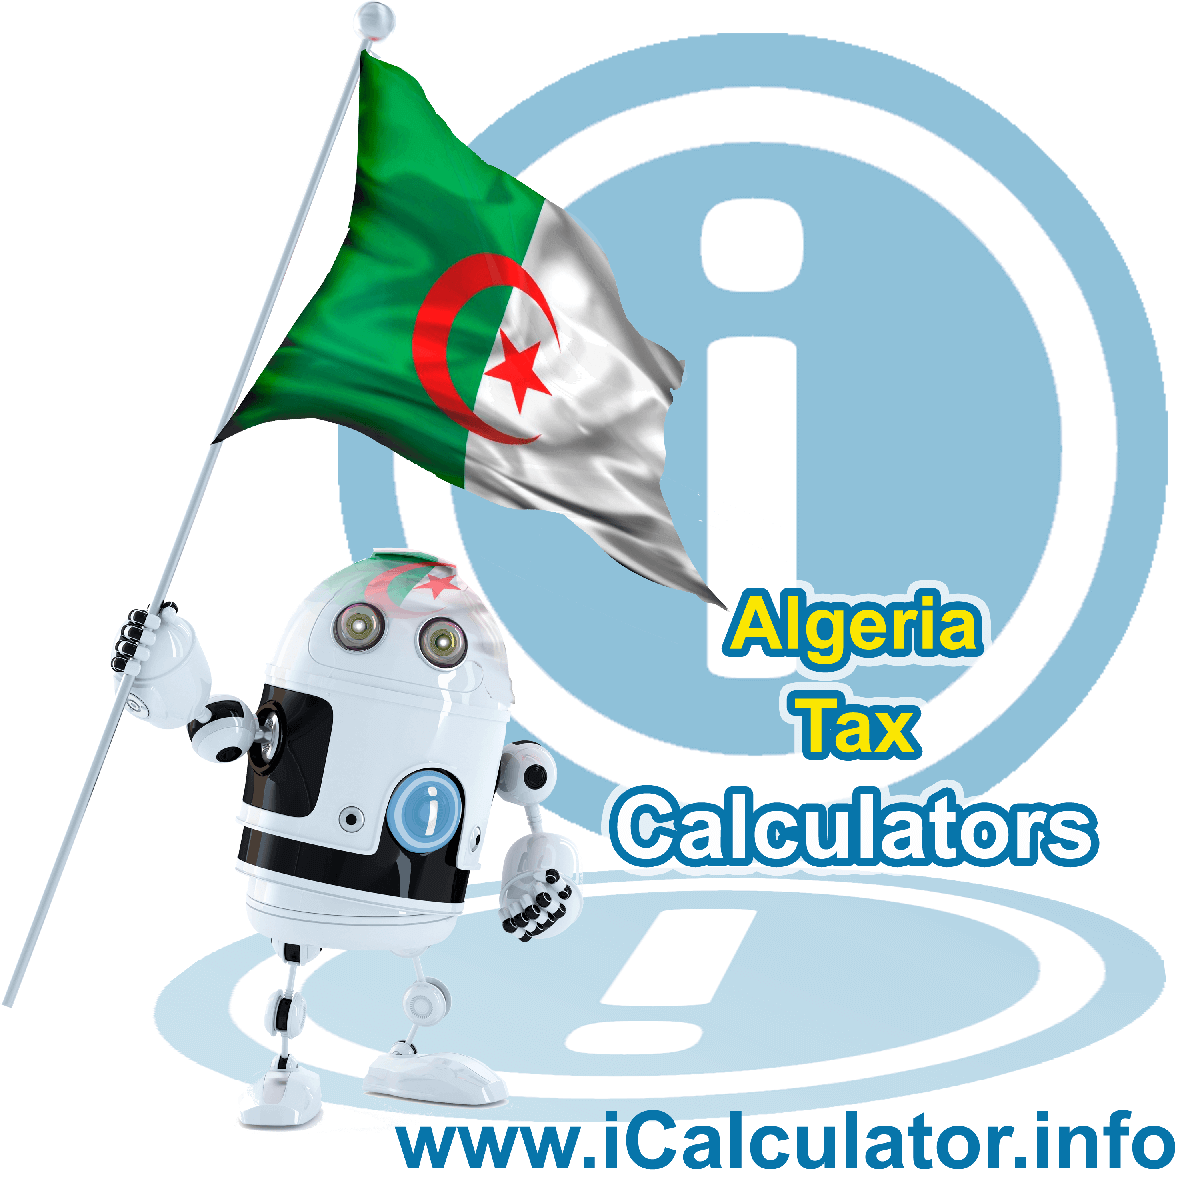 Algeria Salary Calculator. This image shows the Algeriaese flag and information relating to the tax formula for the Algeria Tax Calculator